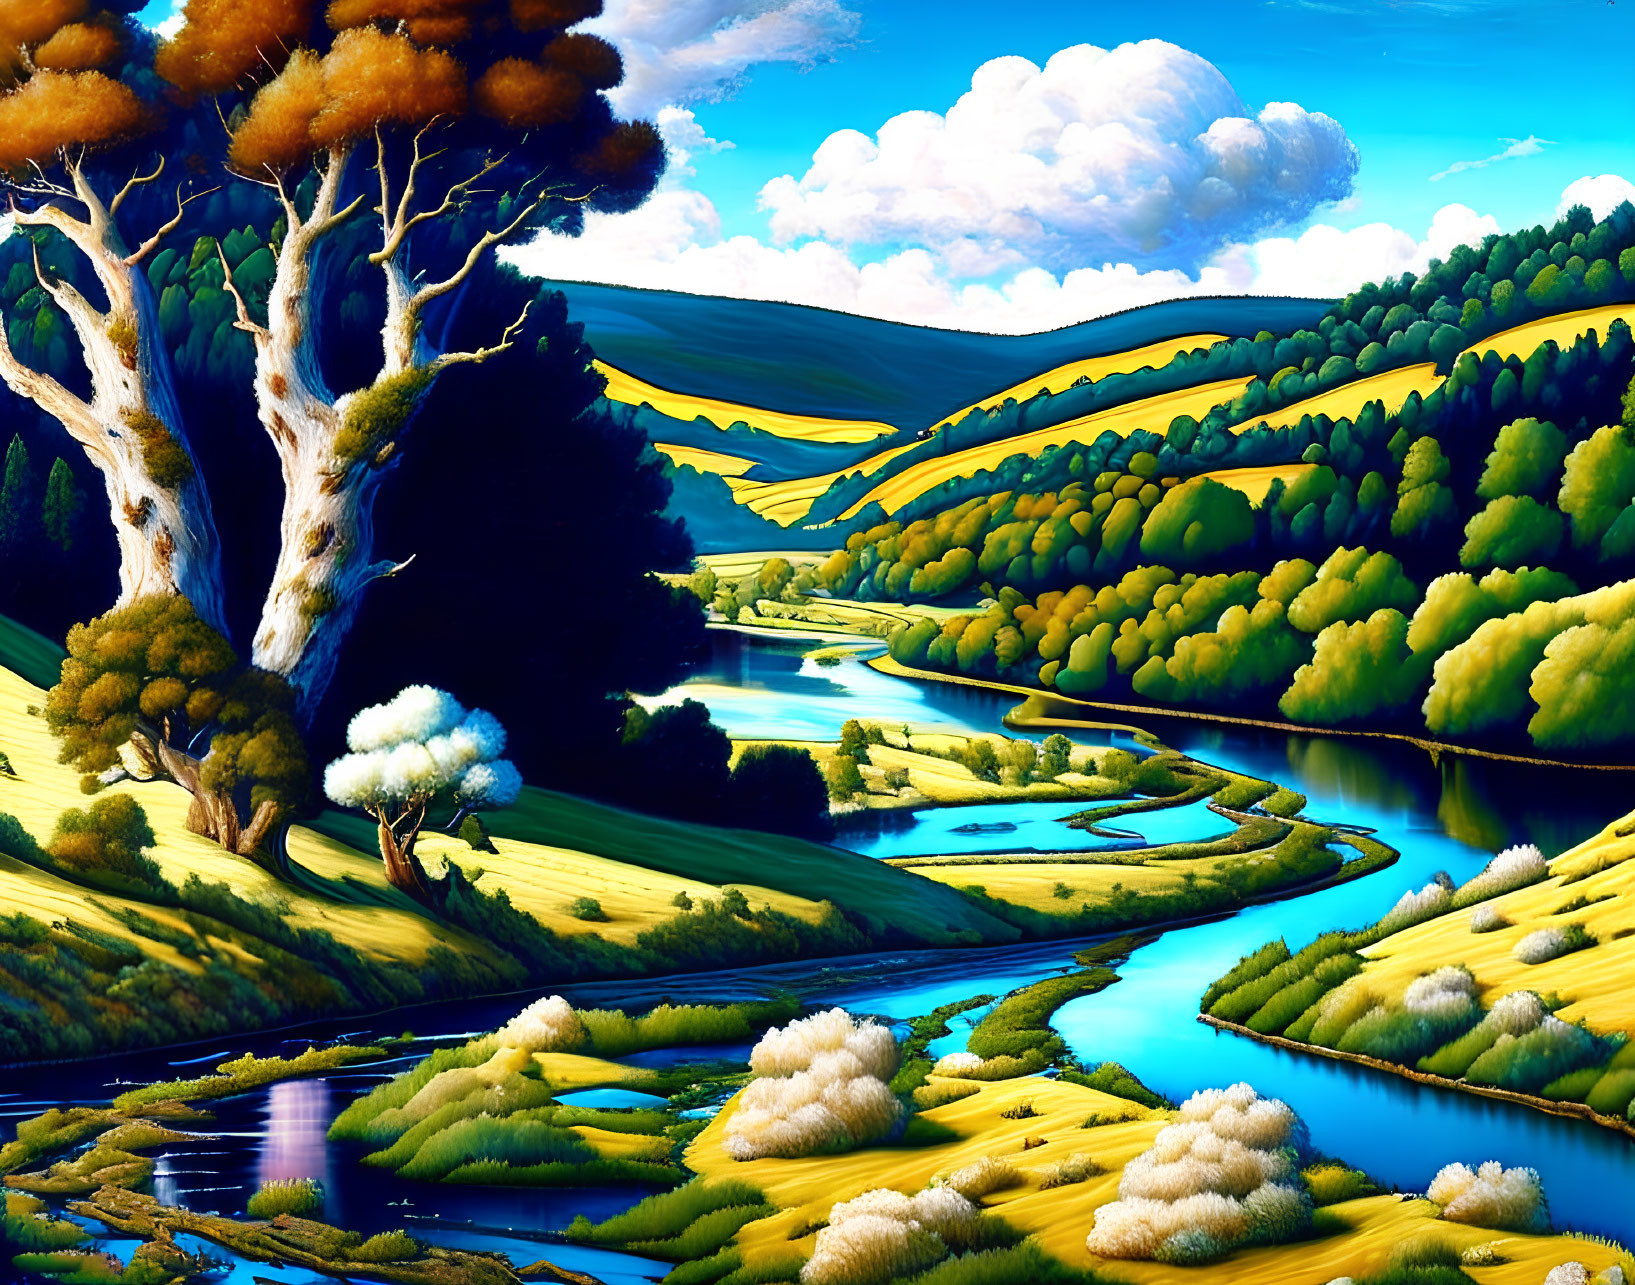 Colorful landscape with winding river, rolling hills, green trees, and blue skies